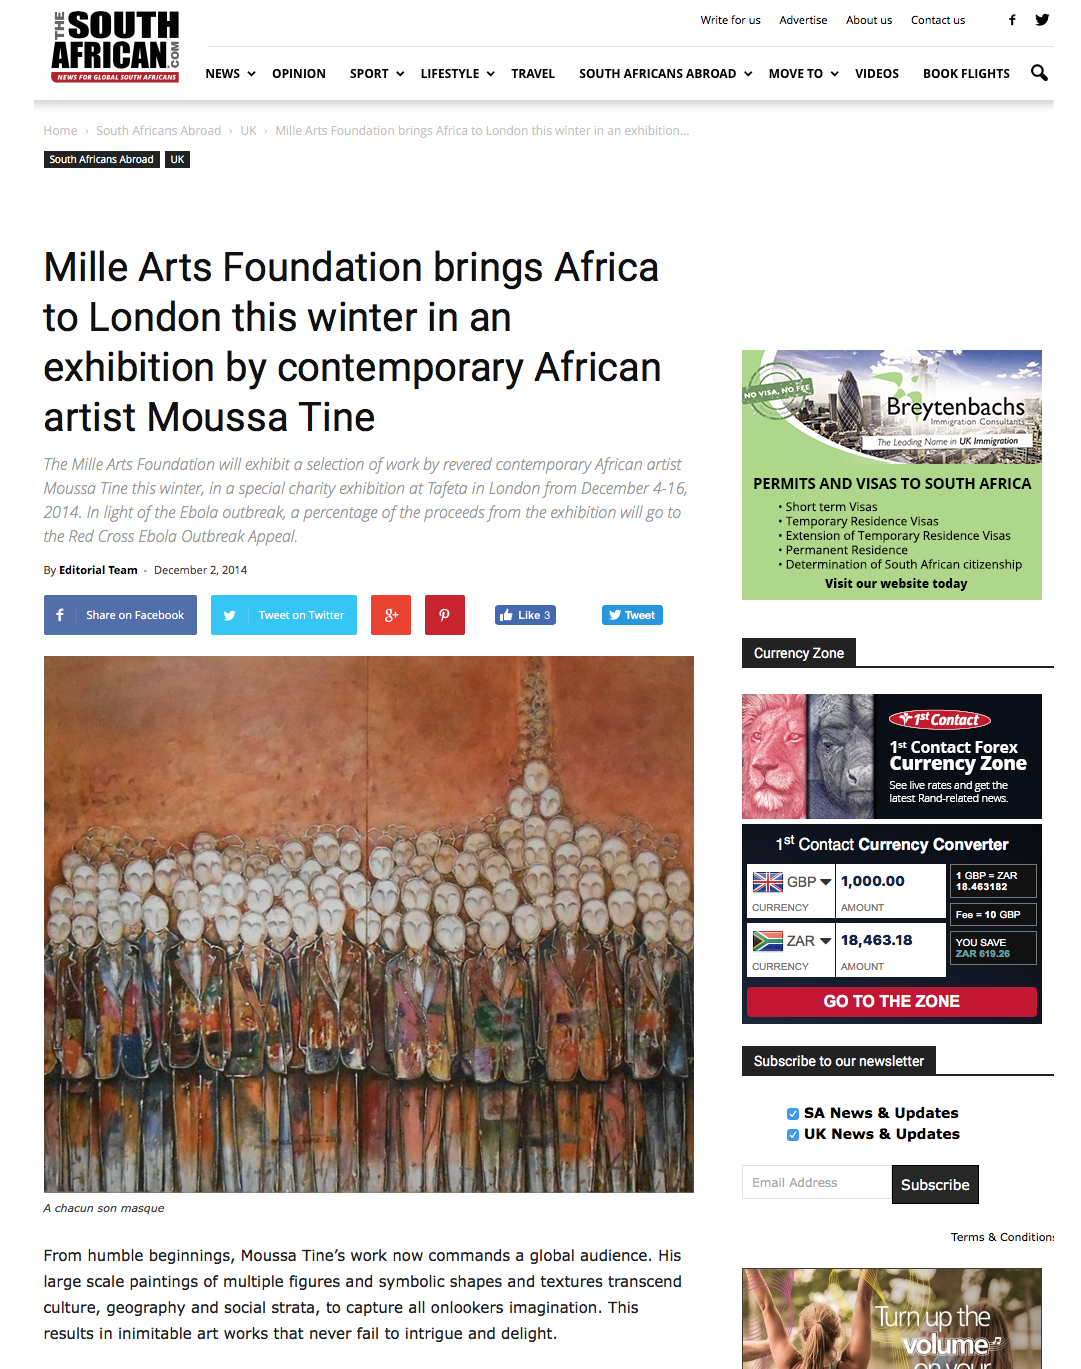 Mable Agbodan exhibit Moussa Tine in London